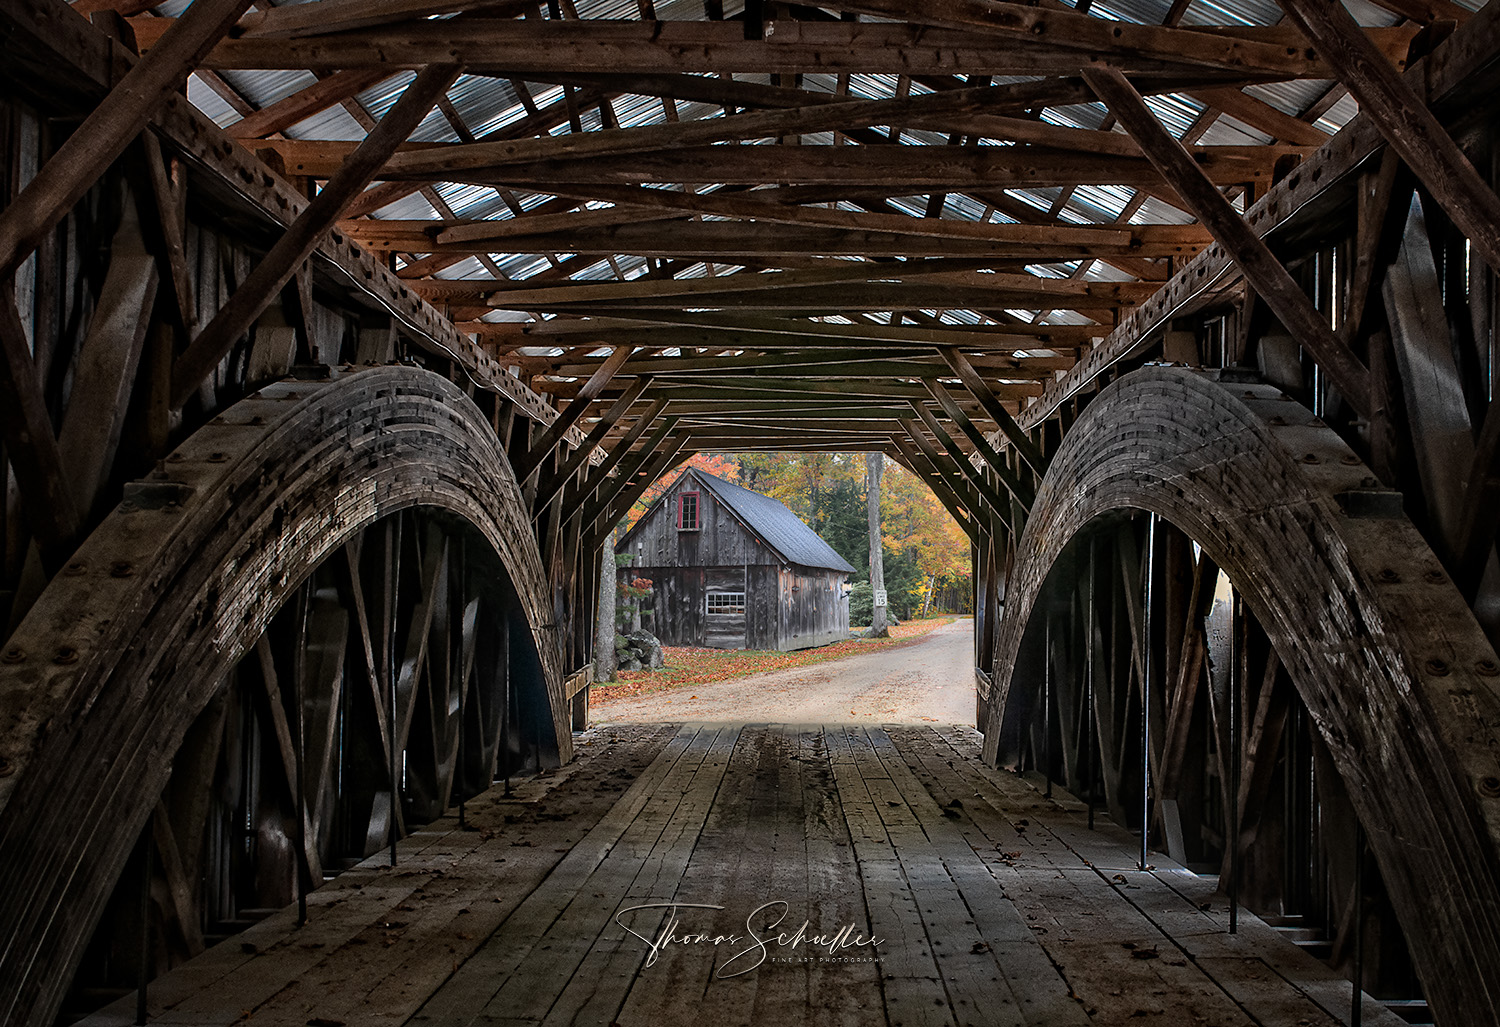 Fantasy Artwork from Inside a Rustic New England Covered Bridge Looking Out at A Rustic Barn | Fine Art Photography Prints